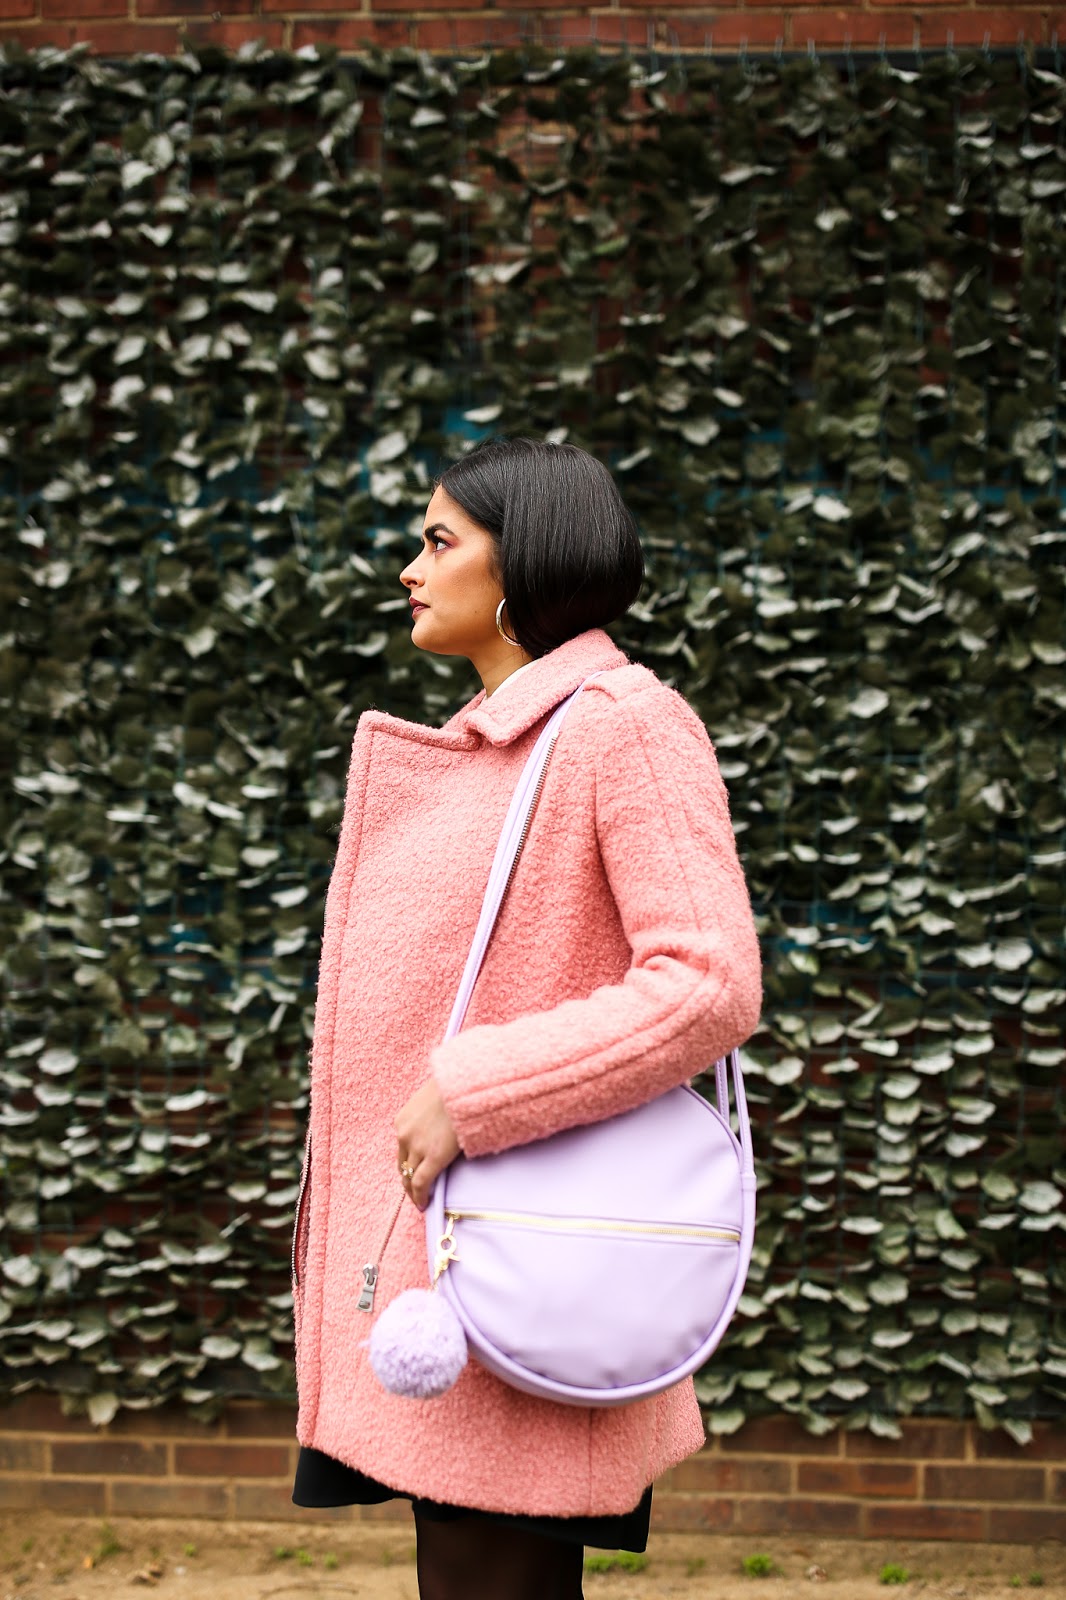 Priya the Blog, Nashville fashion blog, Nashville fashion blogger, Nashville style blog, Nashville style blogger, Rag & Bone Harrow booties, cute Winter outfit, how to style a winter coat, pink fuzzy coat, pink teddy coat, how to wear a pink winter coat, ban.do circle purse, all black Winter outfit